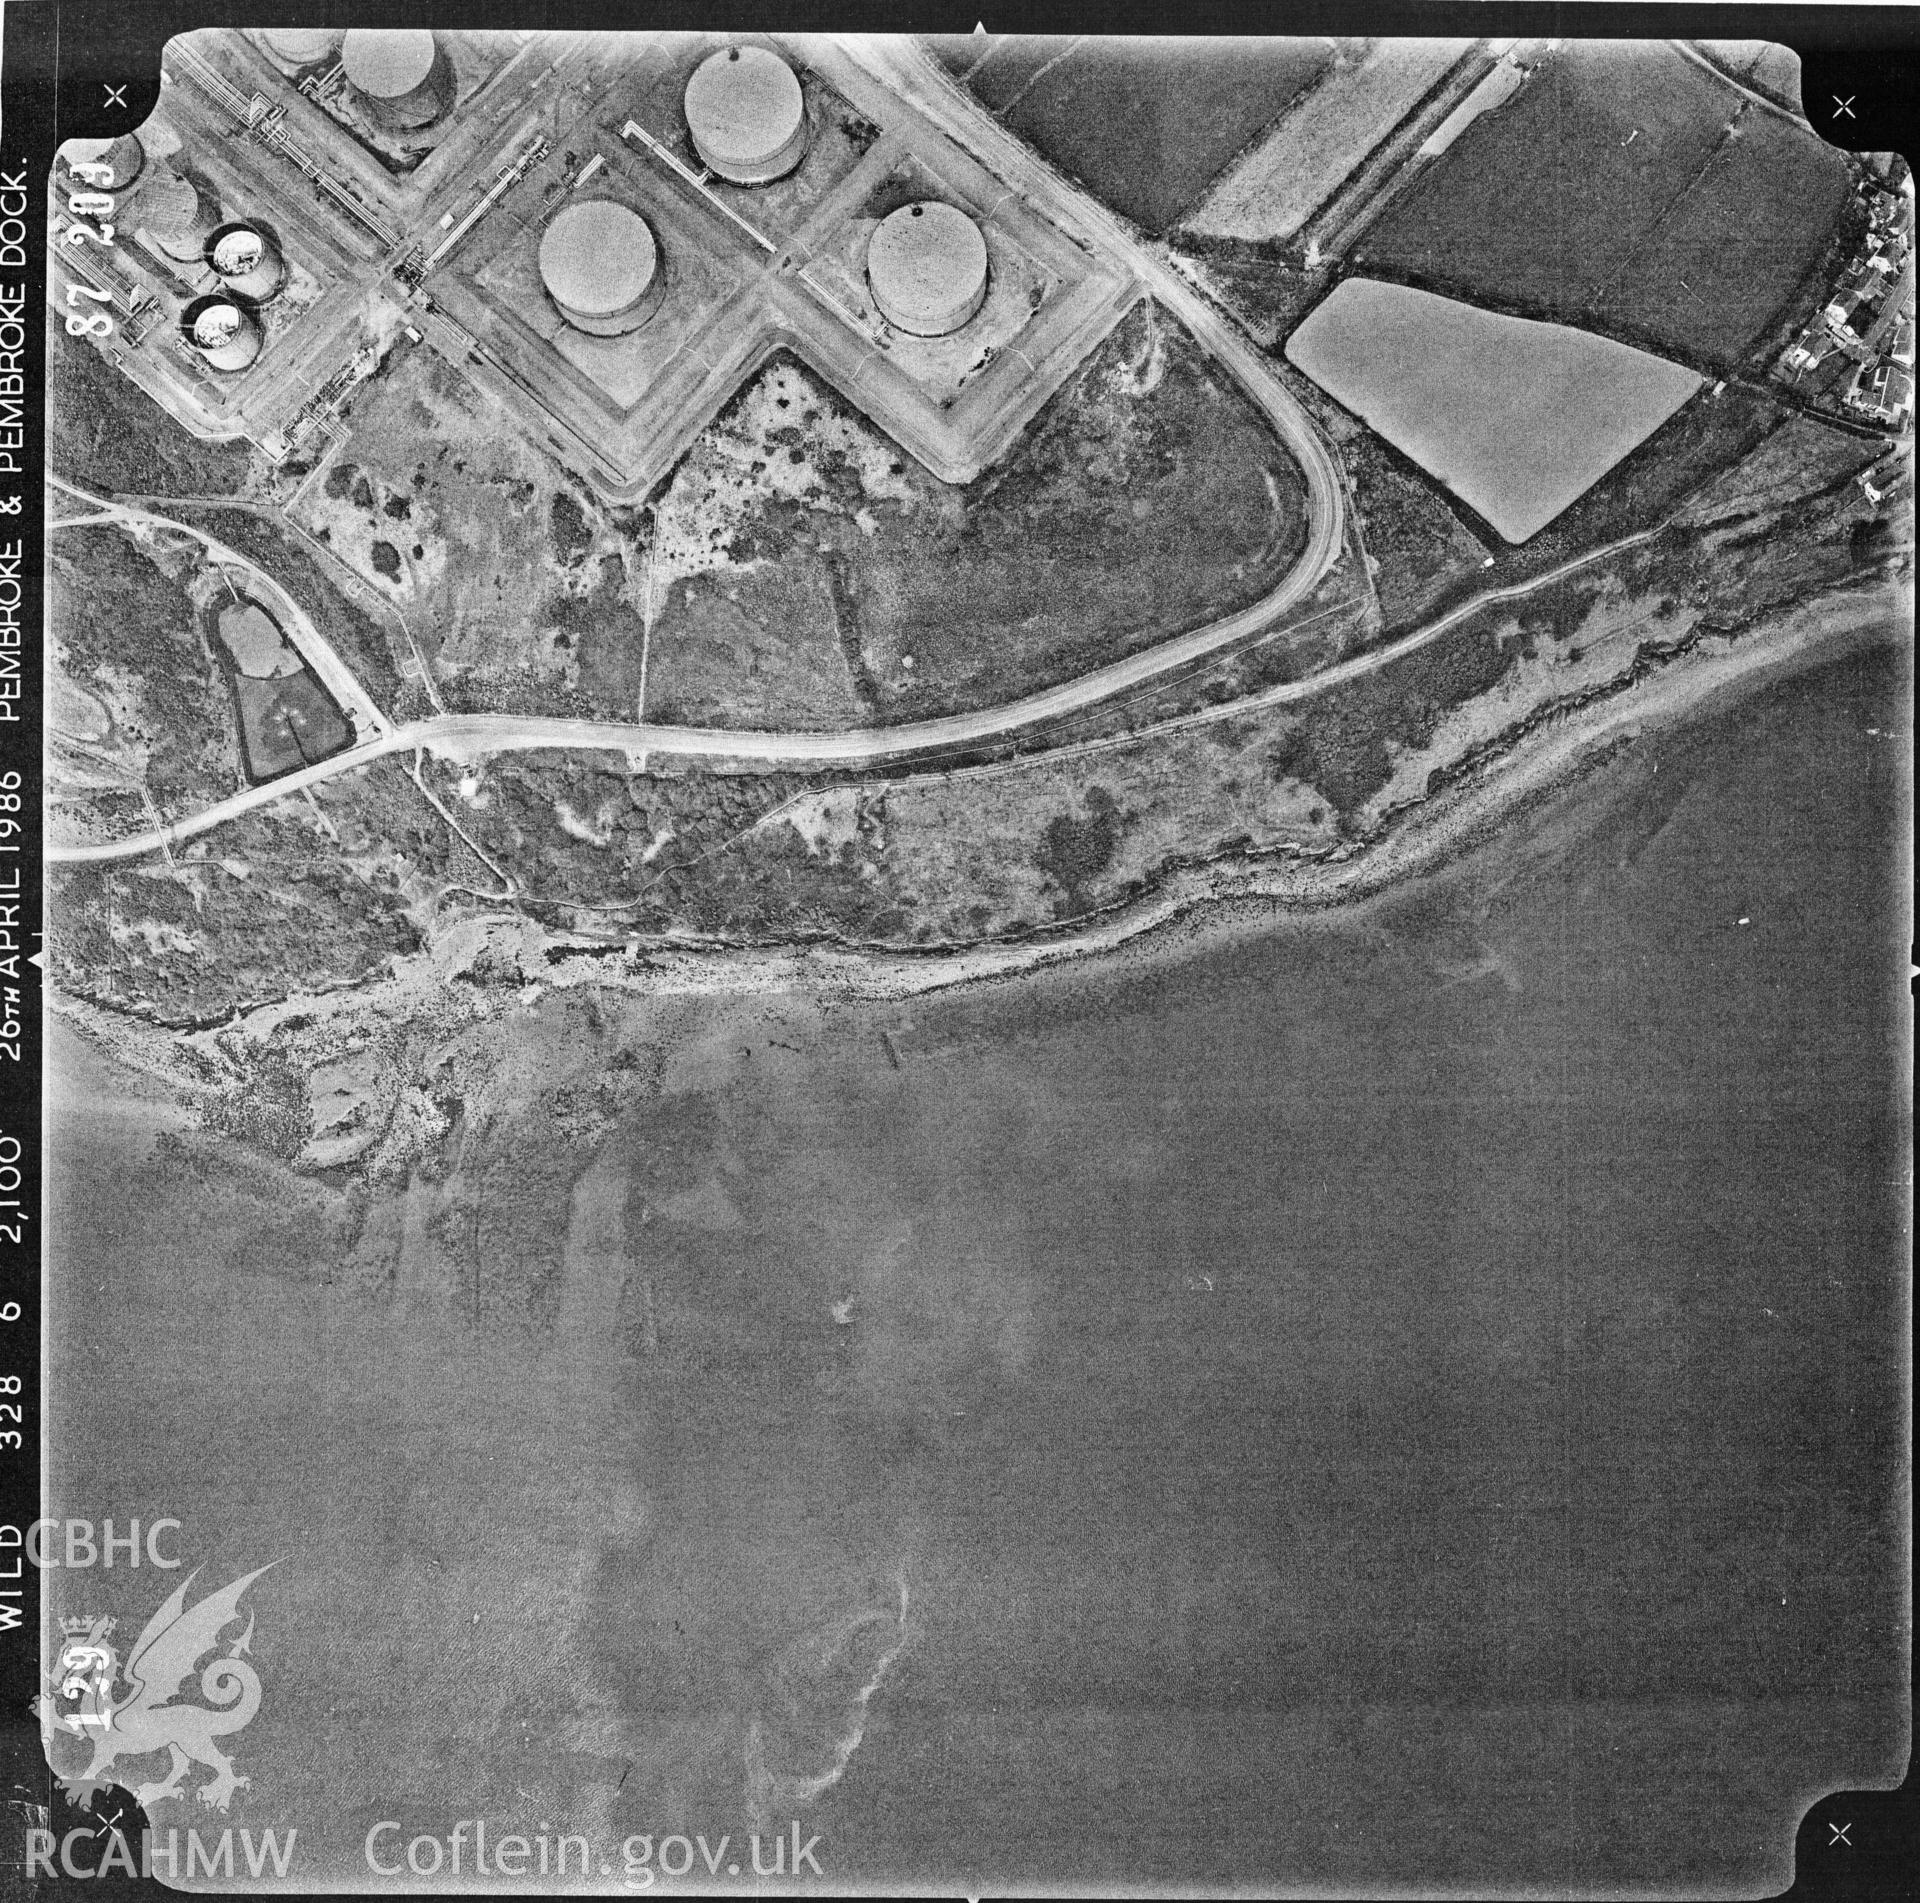 Digital copy of an aerial photograph taken in 1986 , showing the assessment area.